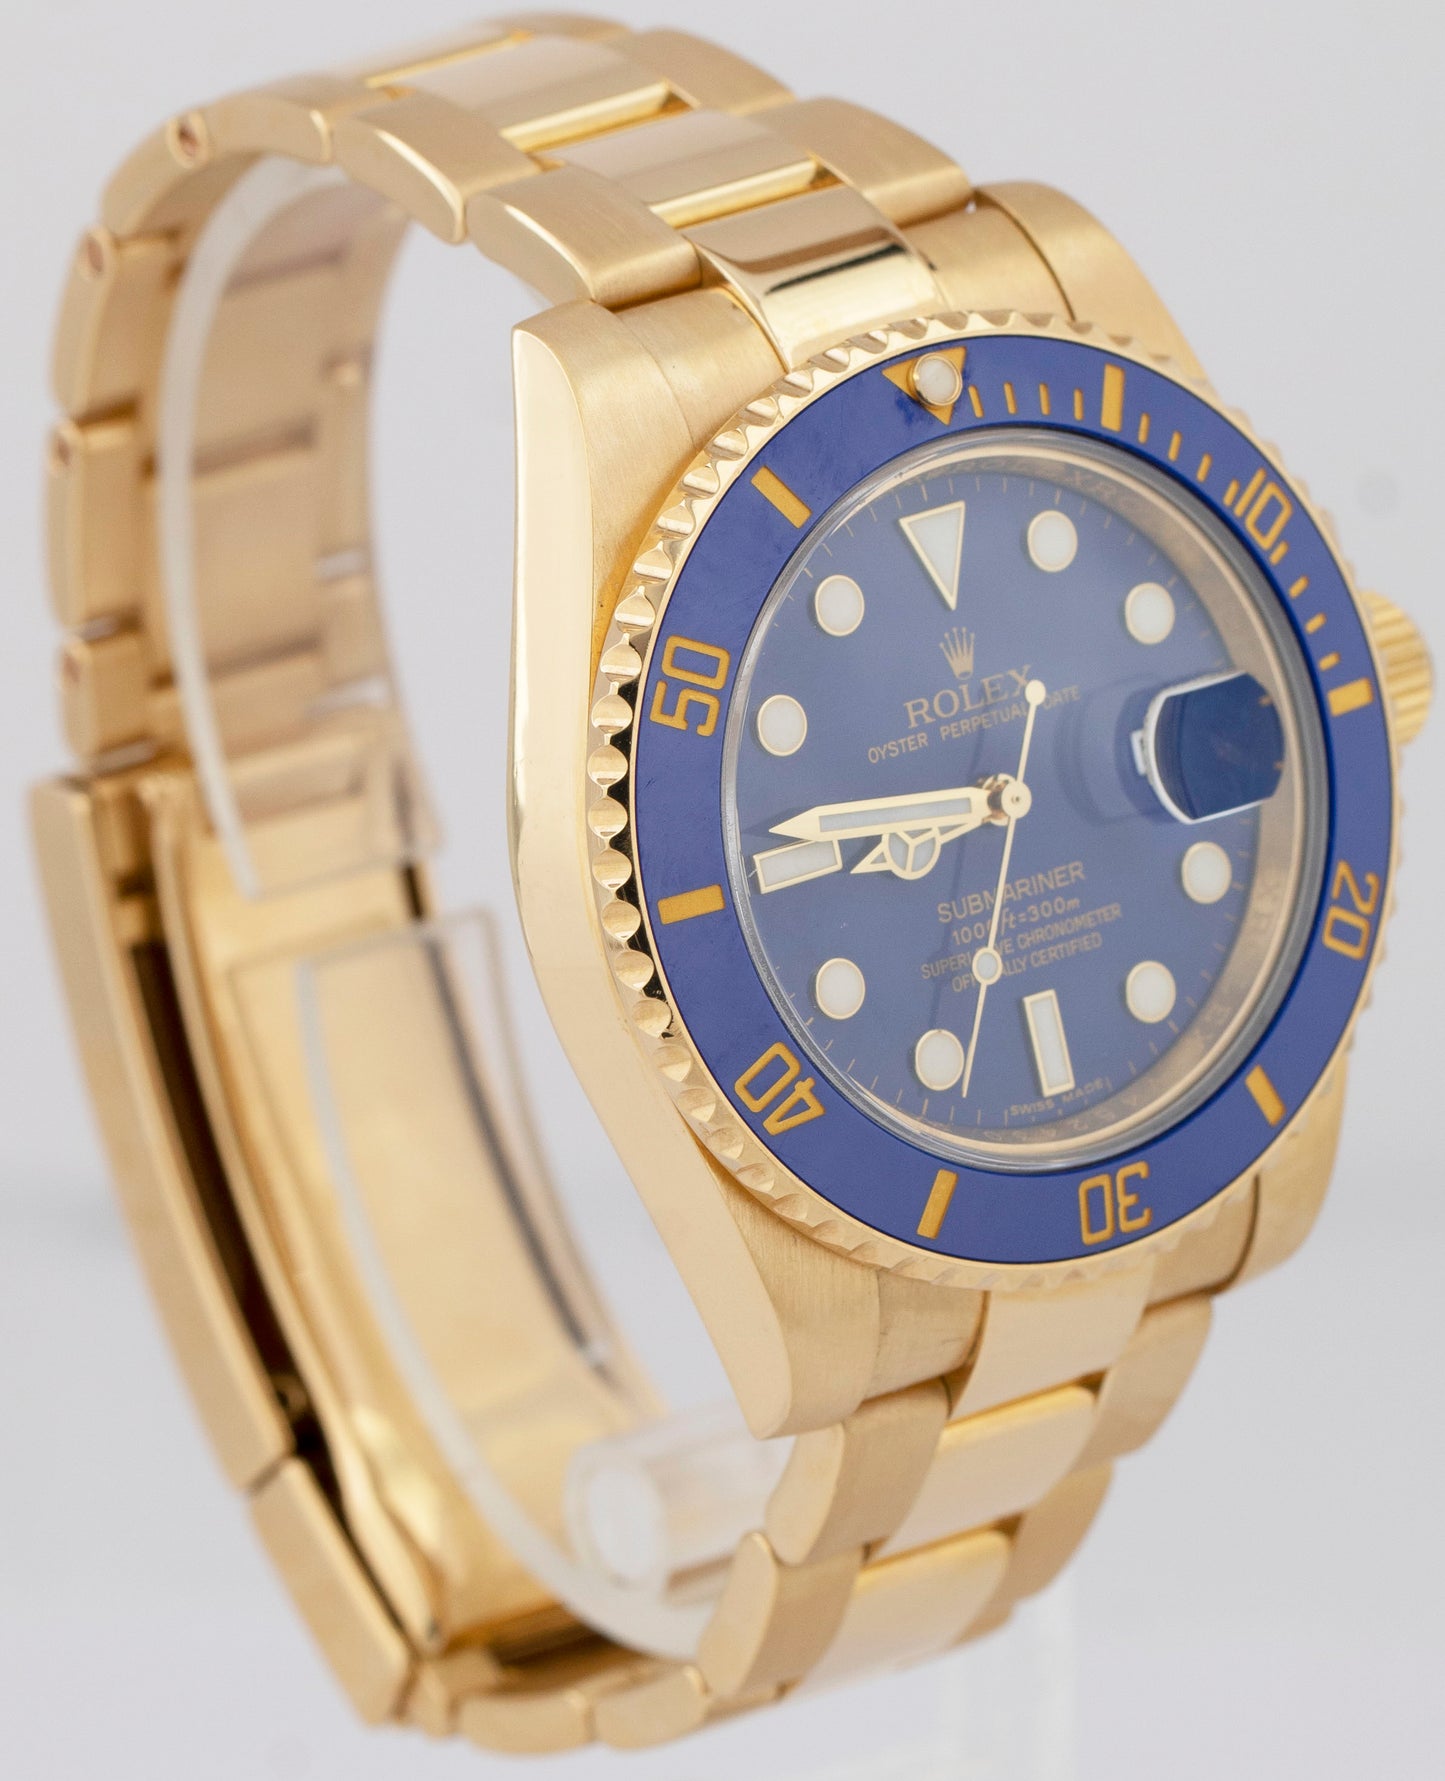 Rolex Submariner 116618 40mm in Yellow Gold - US